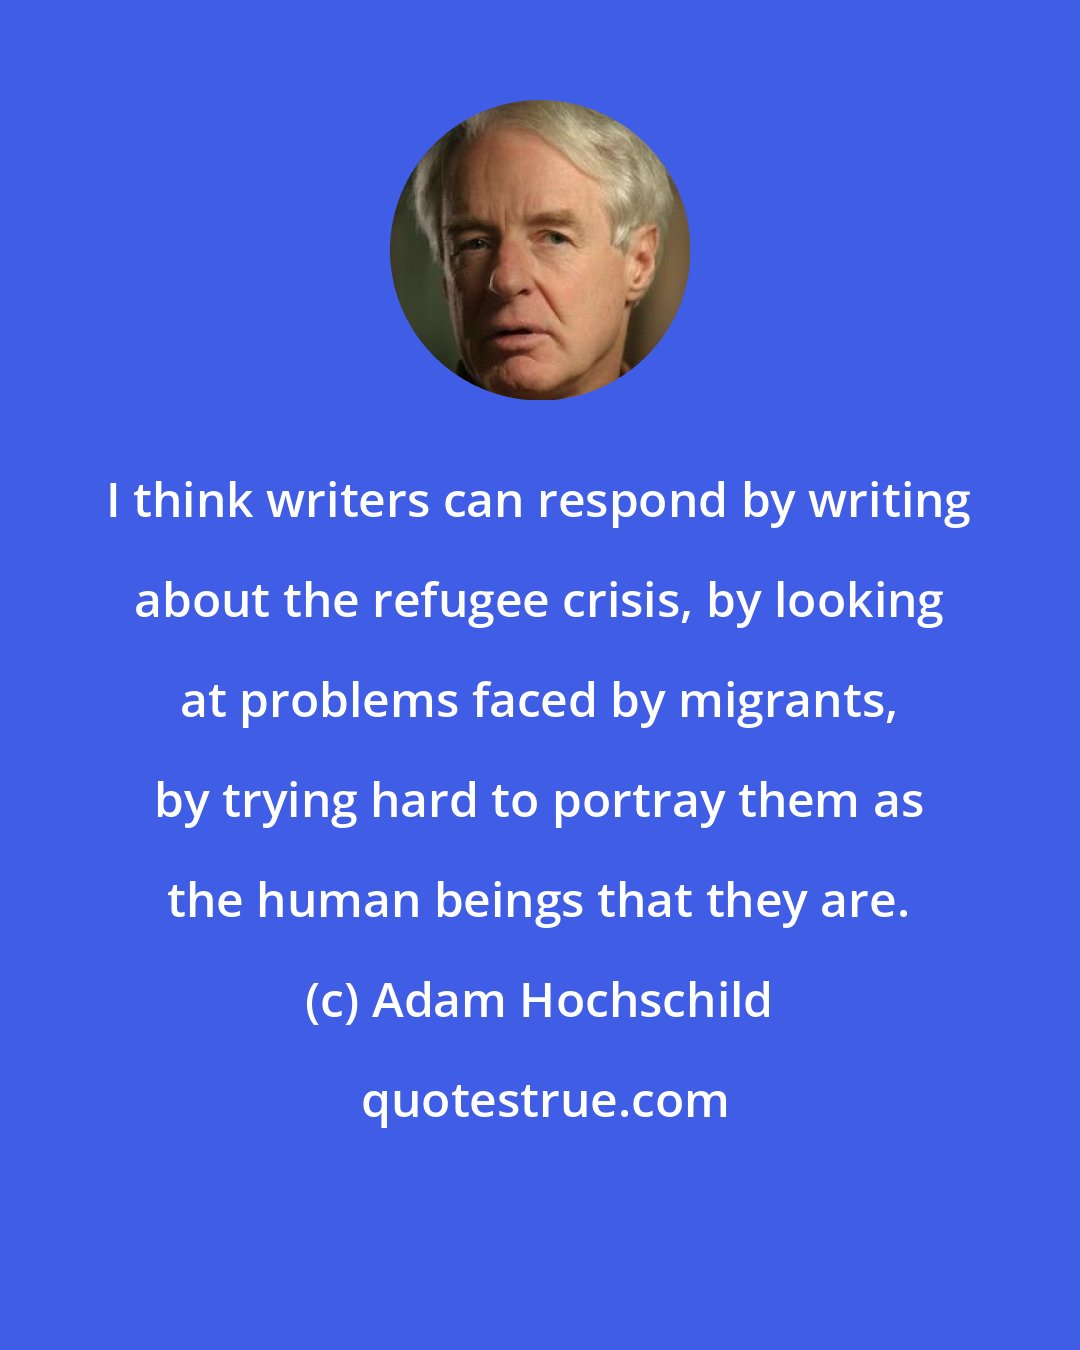 Adam Hochschild: I think writers can respond by writing about the refugee crisis, by looking at problems faced by migrants, by trying hard to portray them as the human beings that they are.